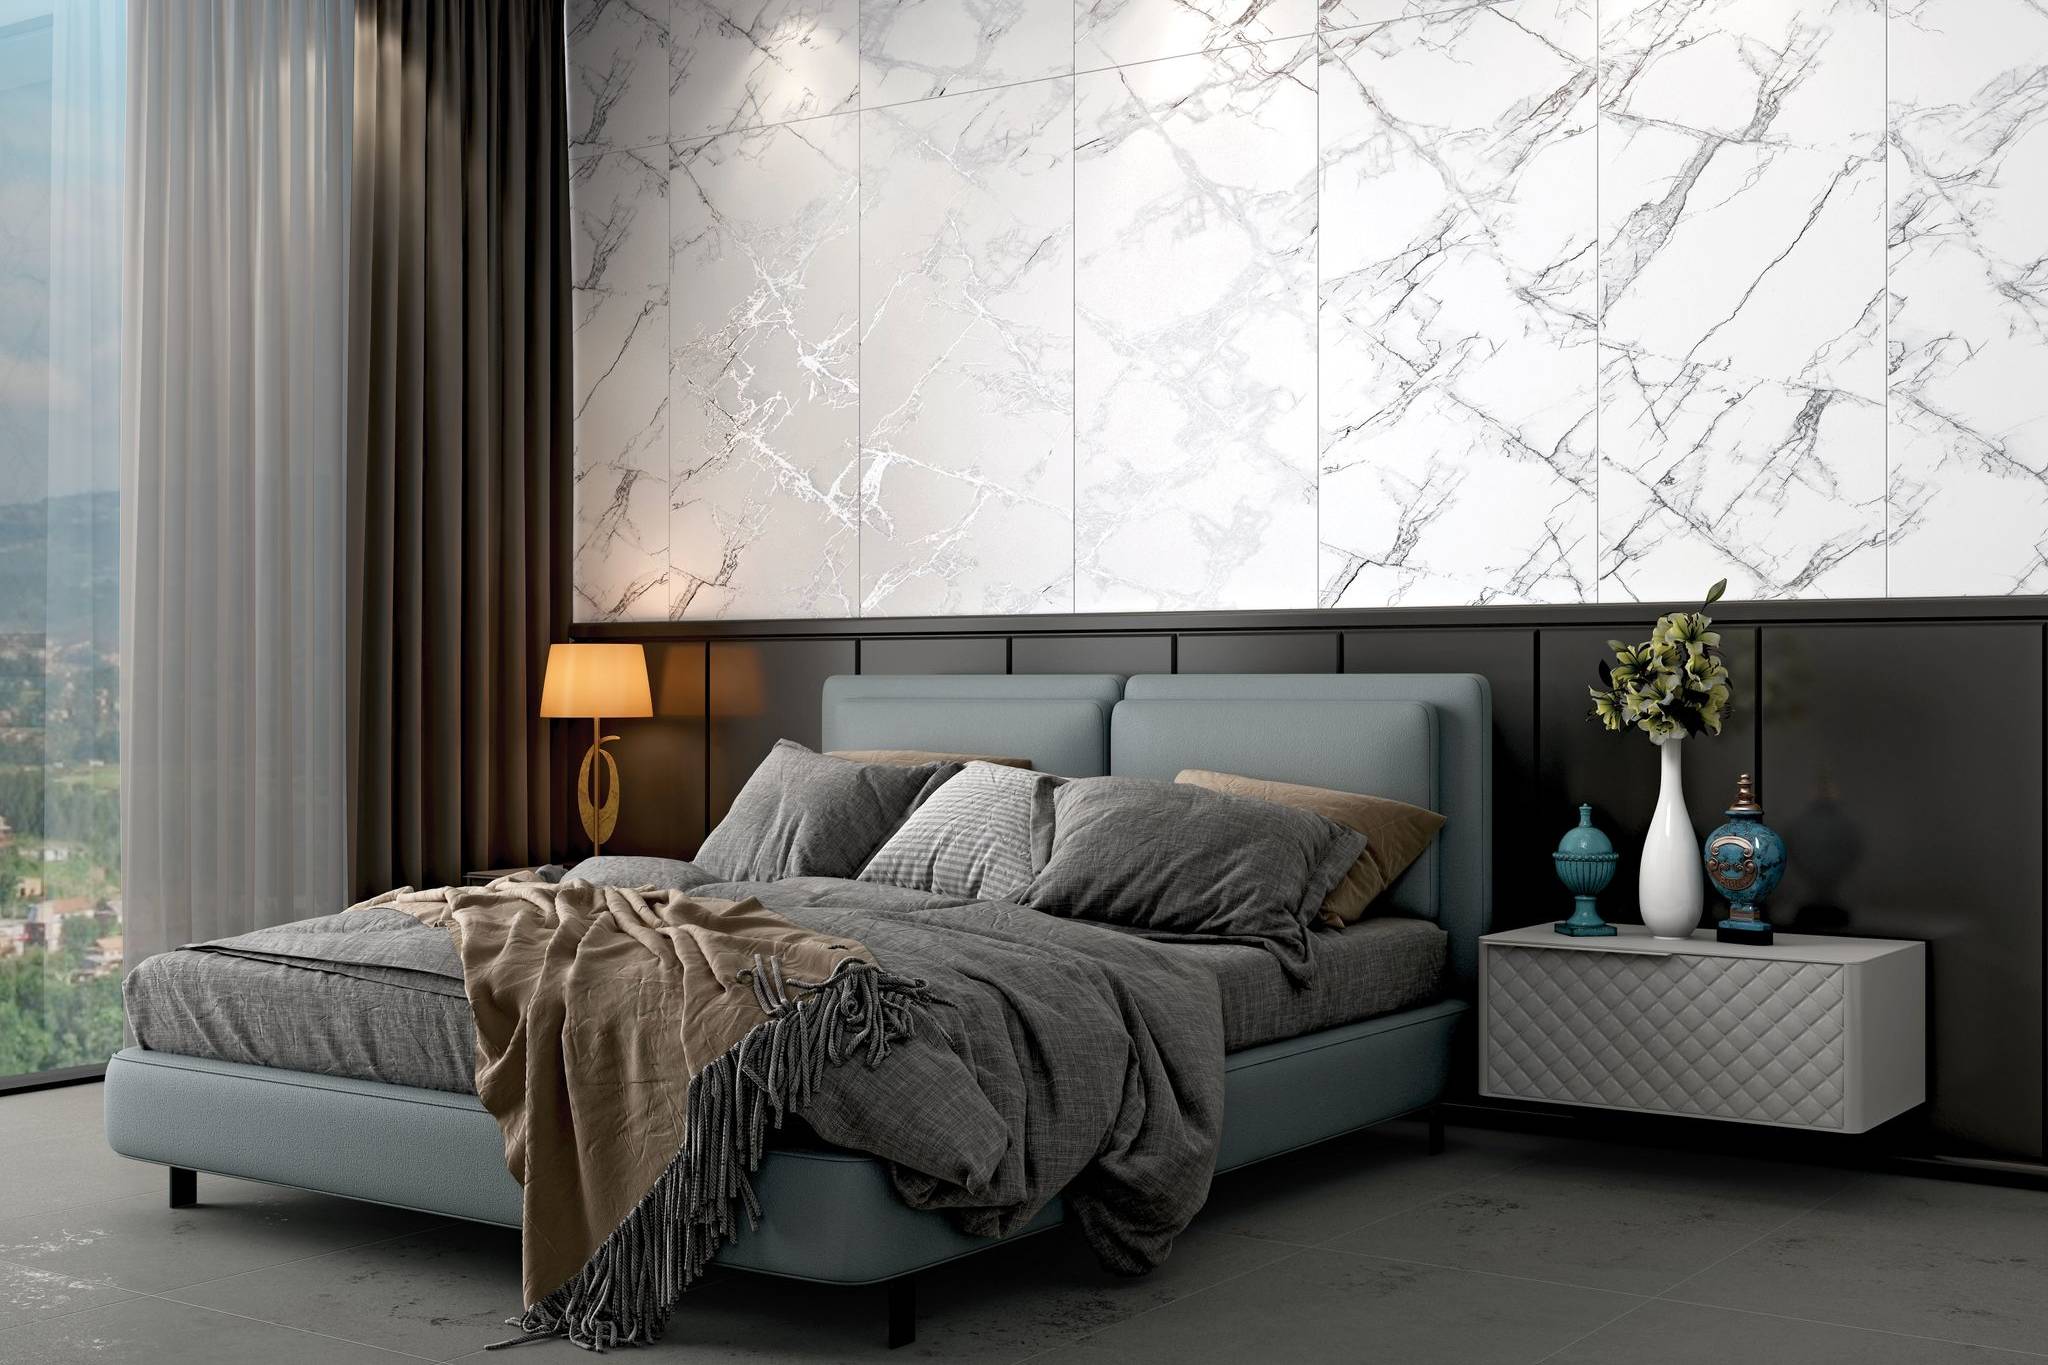 Treasure Ice White Marble 24x48 | Qualis Ceramica | Luxury Tile and Vinyl at affordable prices